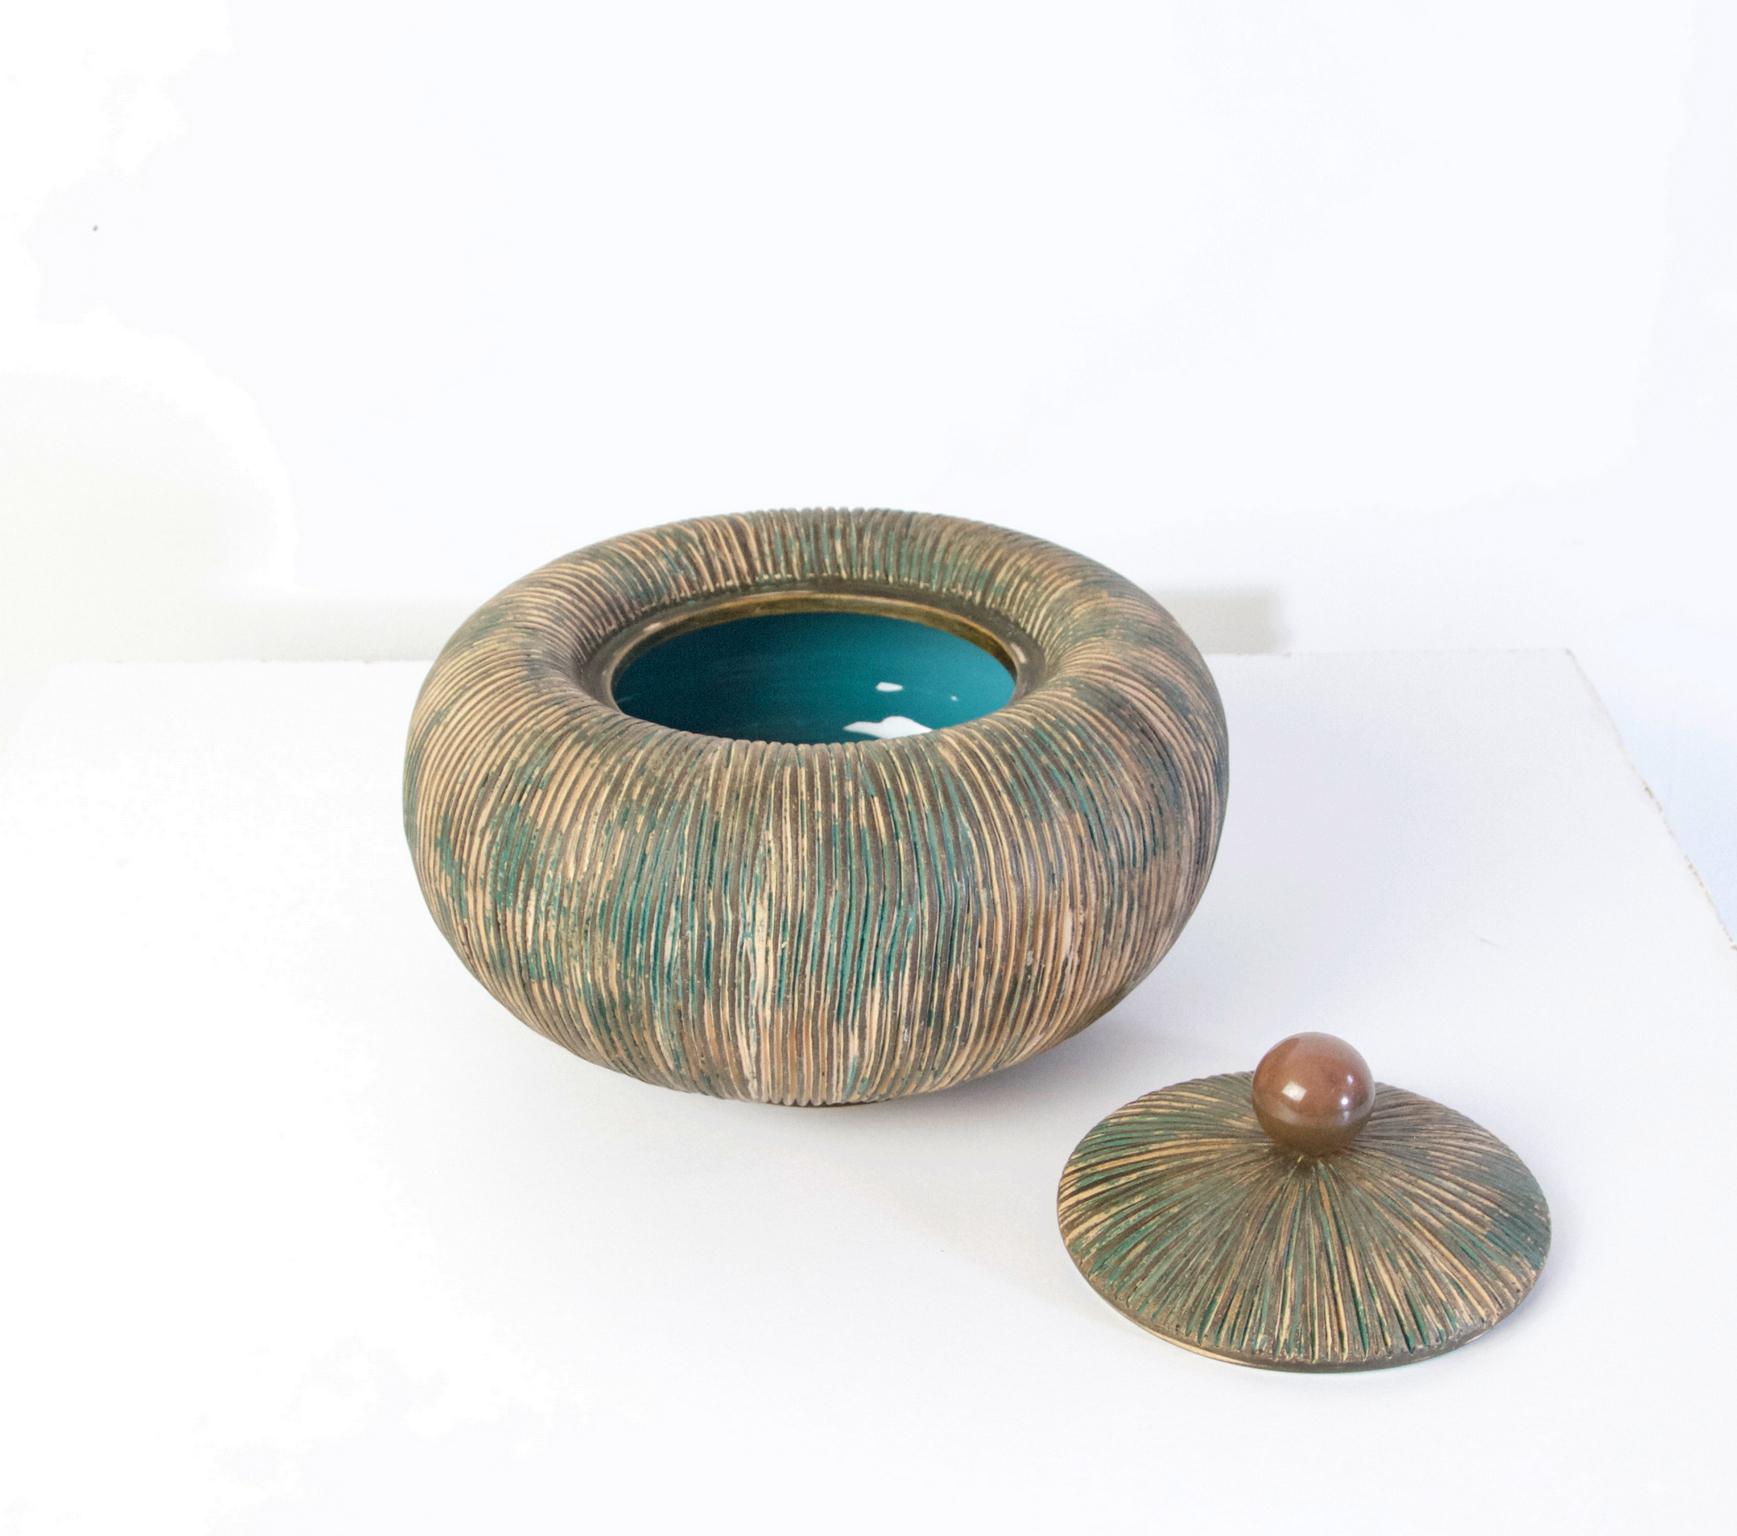 A beautiful pumpkin shaped bowl with lid crowned by a brass handle by Ceramiche Batignani from the 1950's. This handmade bowl is in perfect condition.